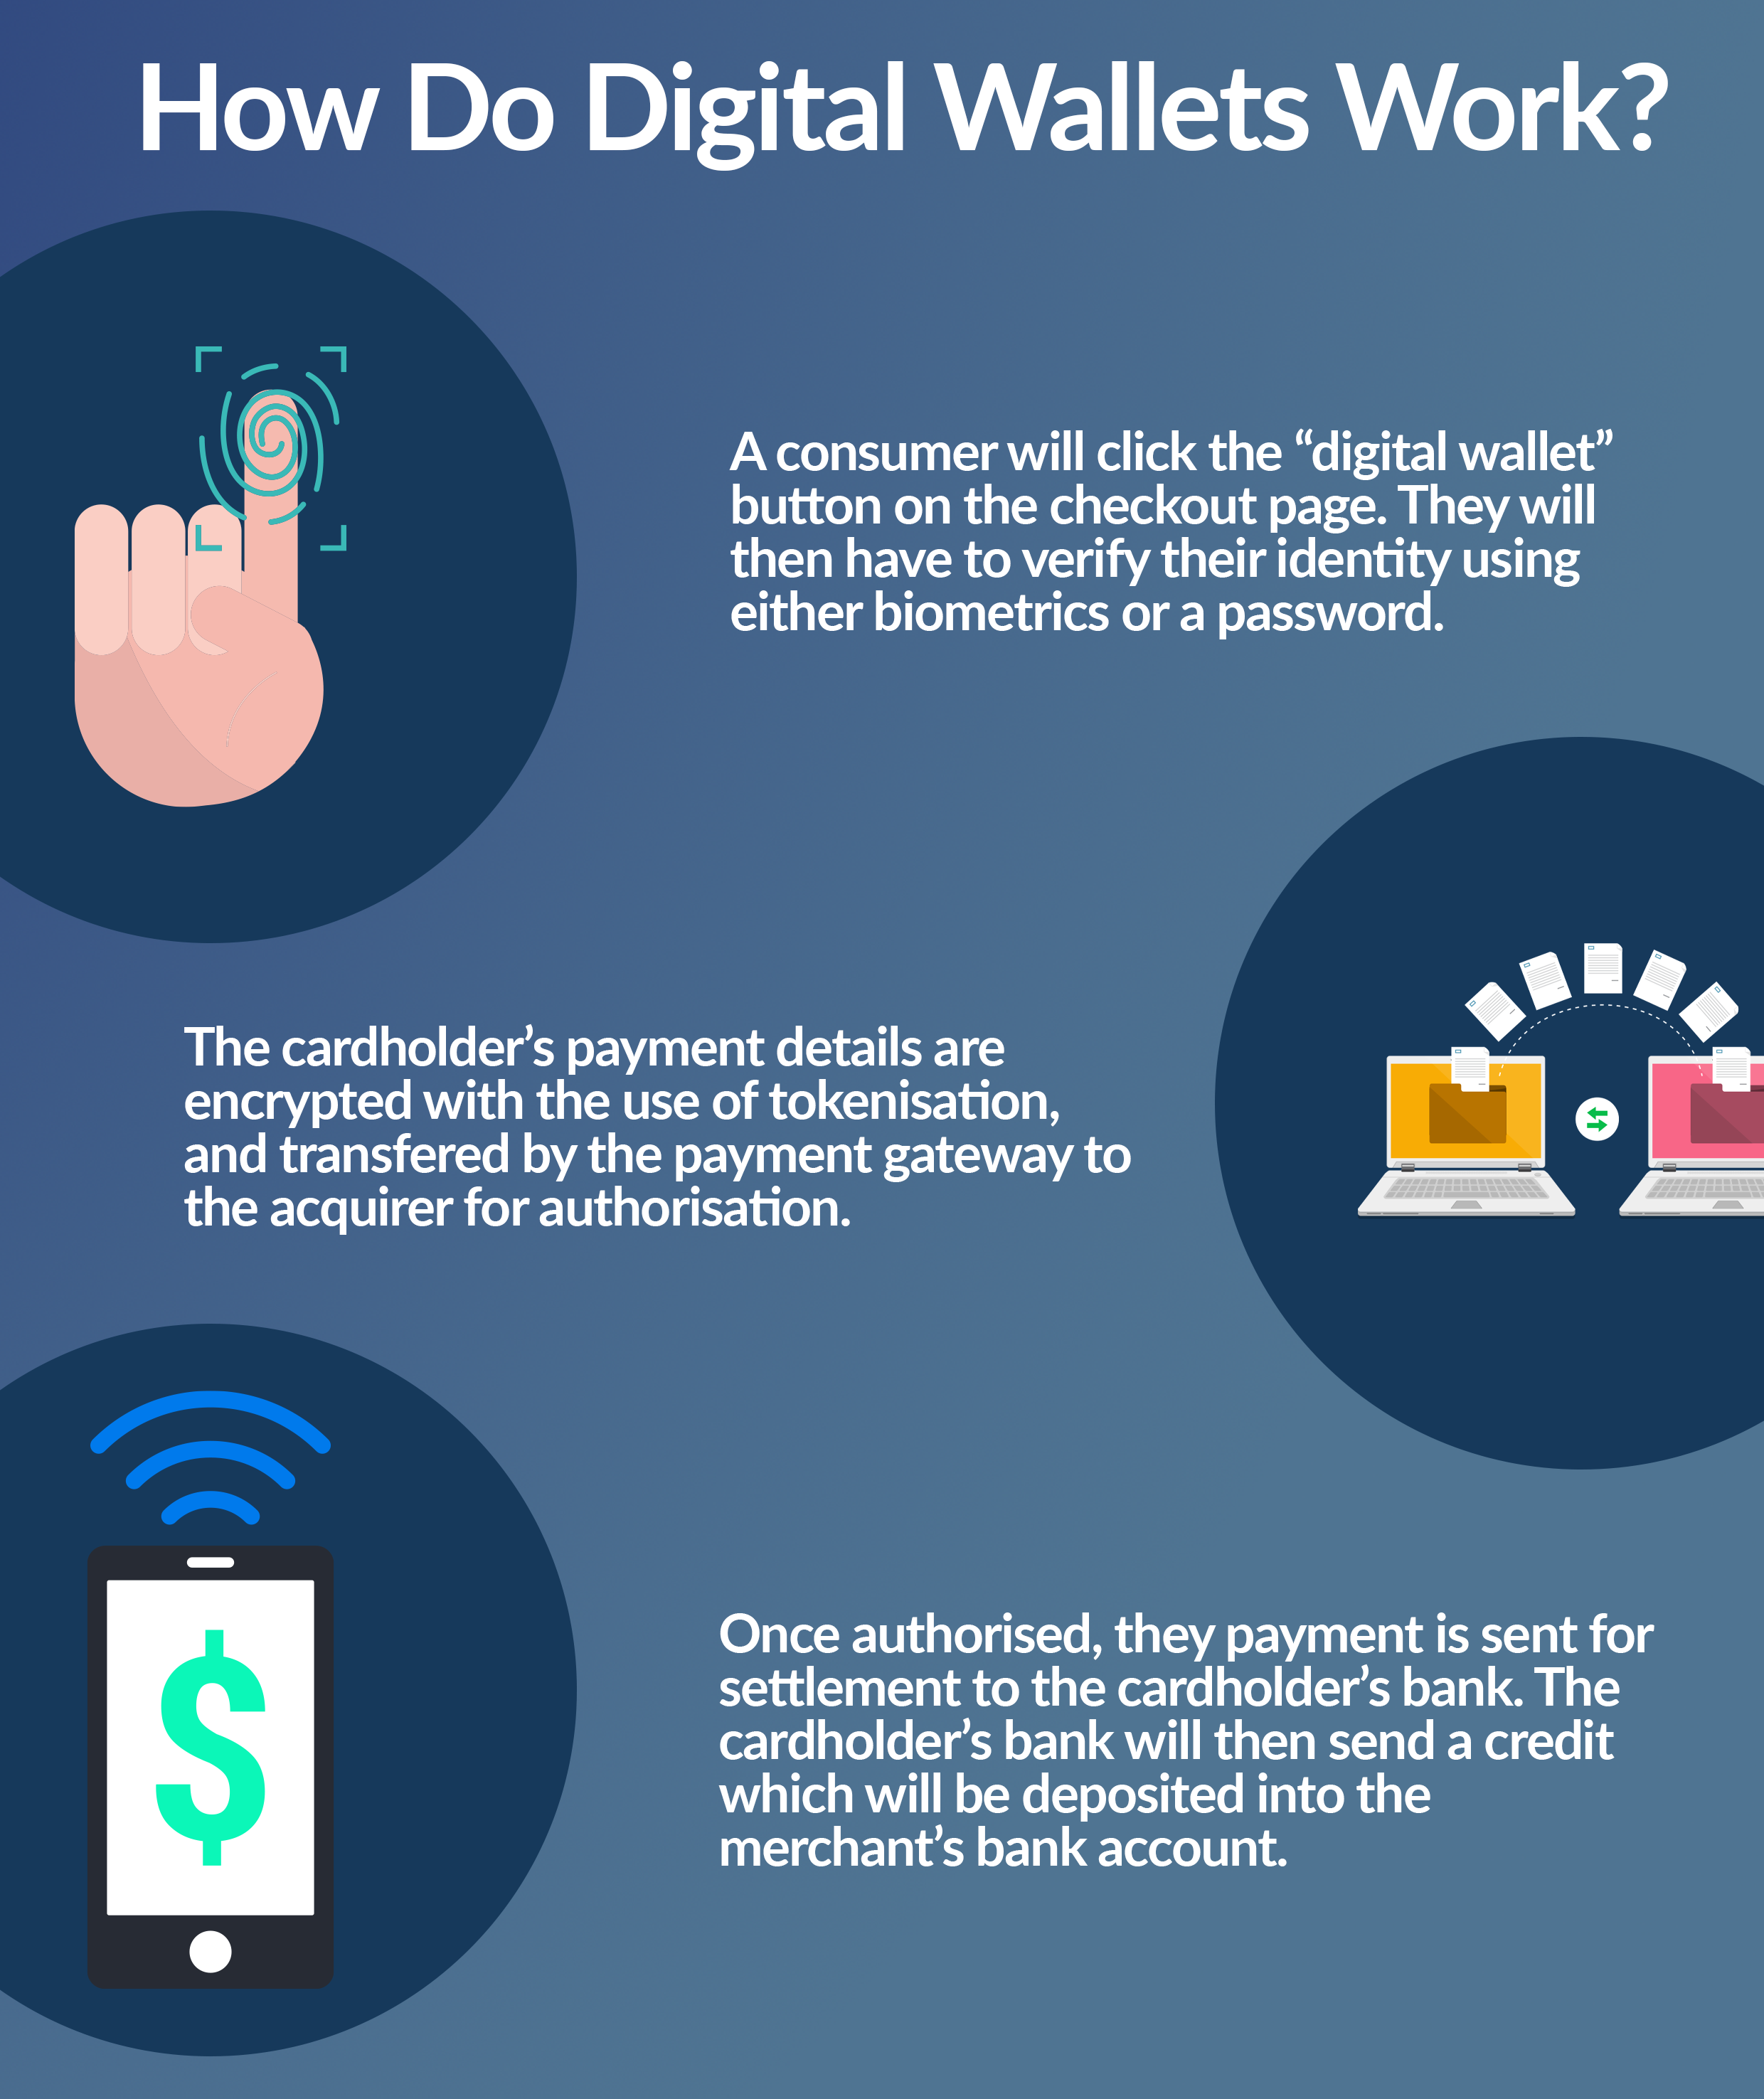 How do digital wallets work? A consumer will click on the digital wallet button on the checkout page. They will then have to verify their identity using either biometrics or a password. The cardholder's payment details are encrypted with the use of tokenisation and transfered to the payment gateway 